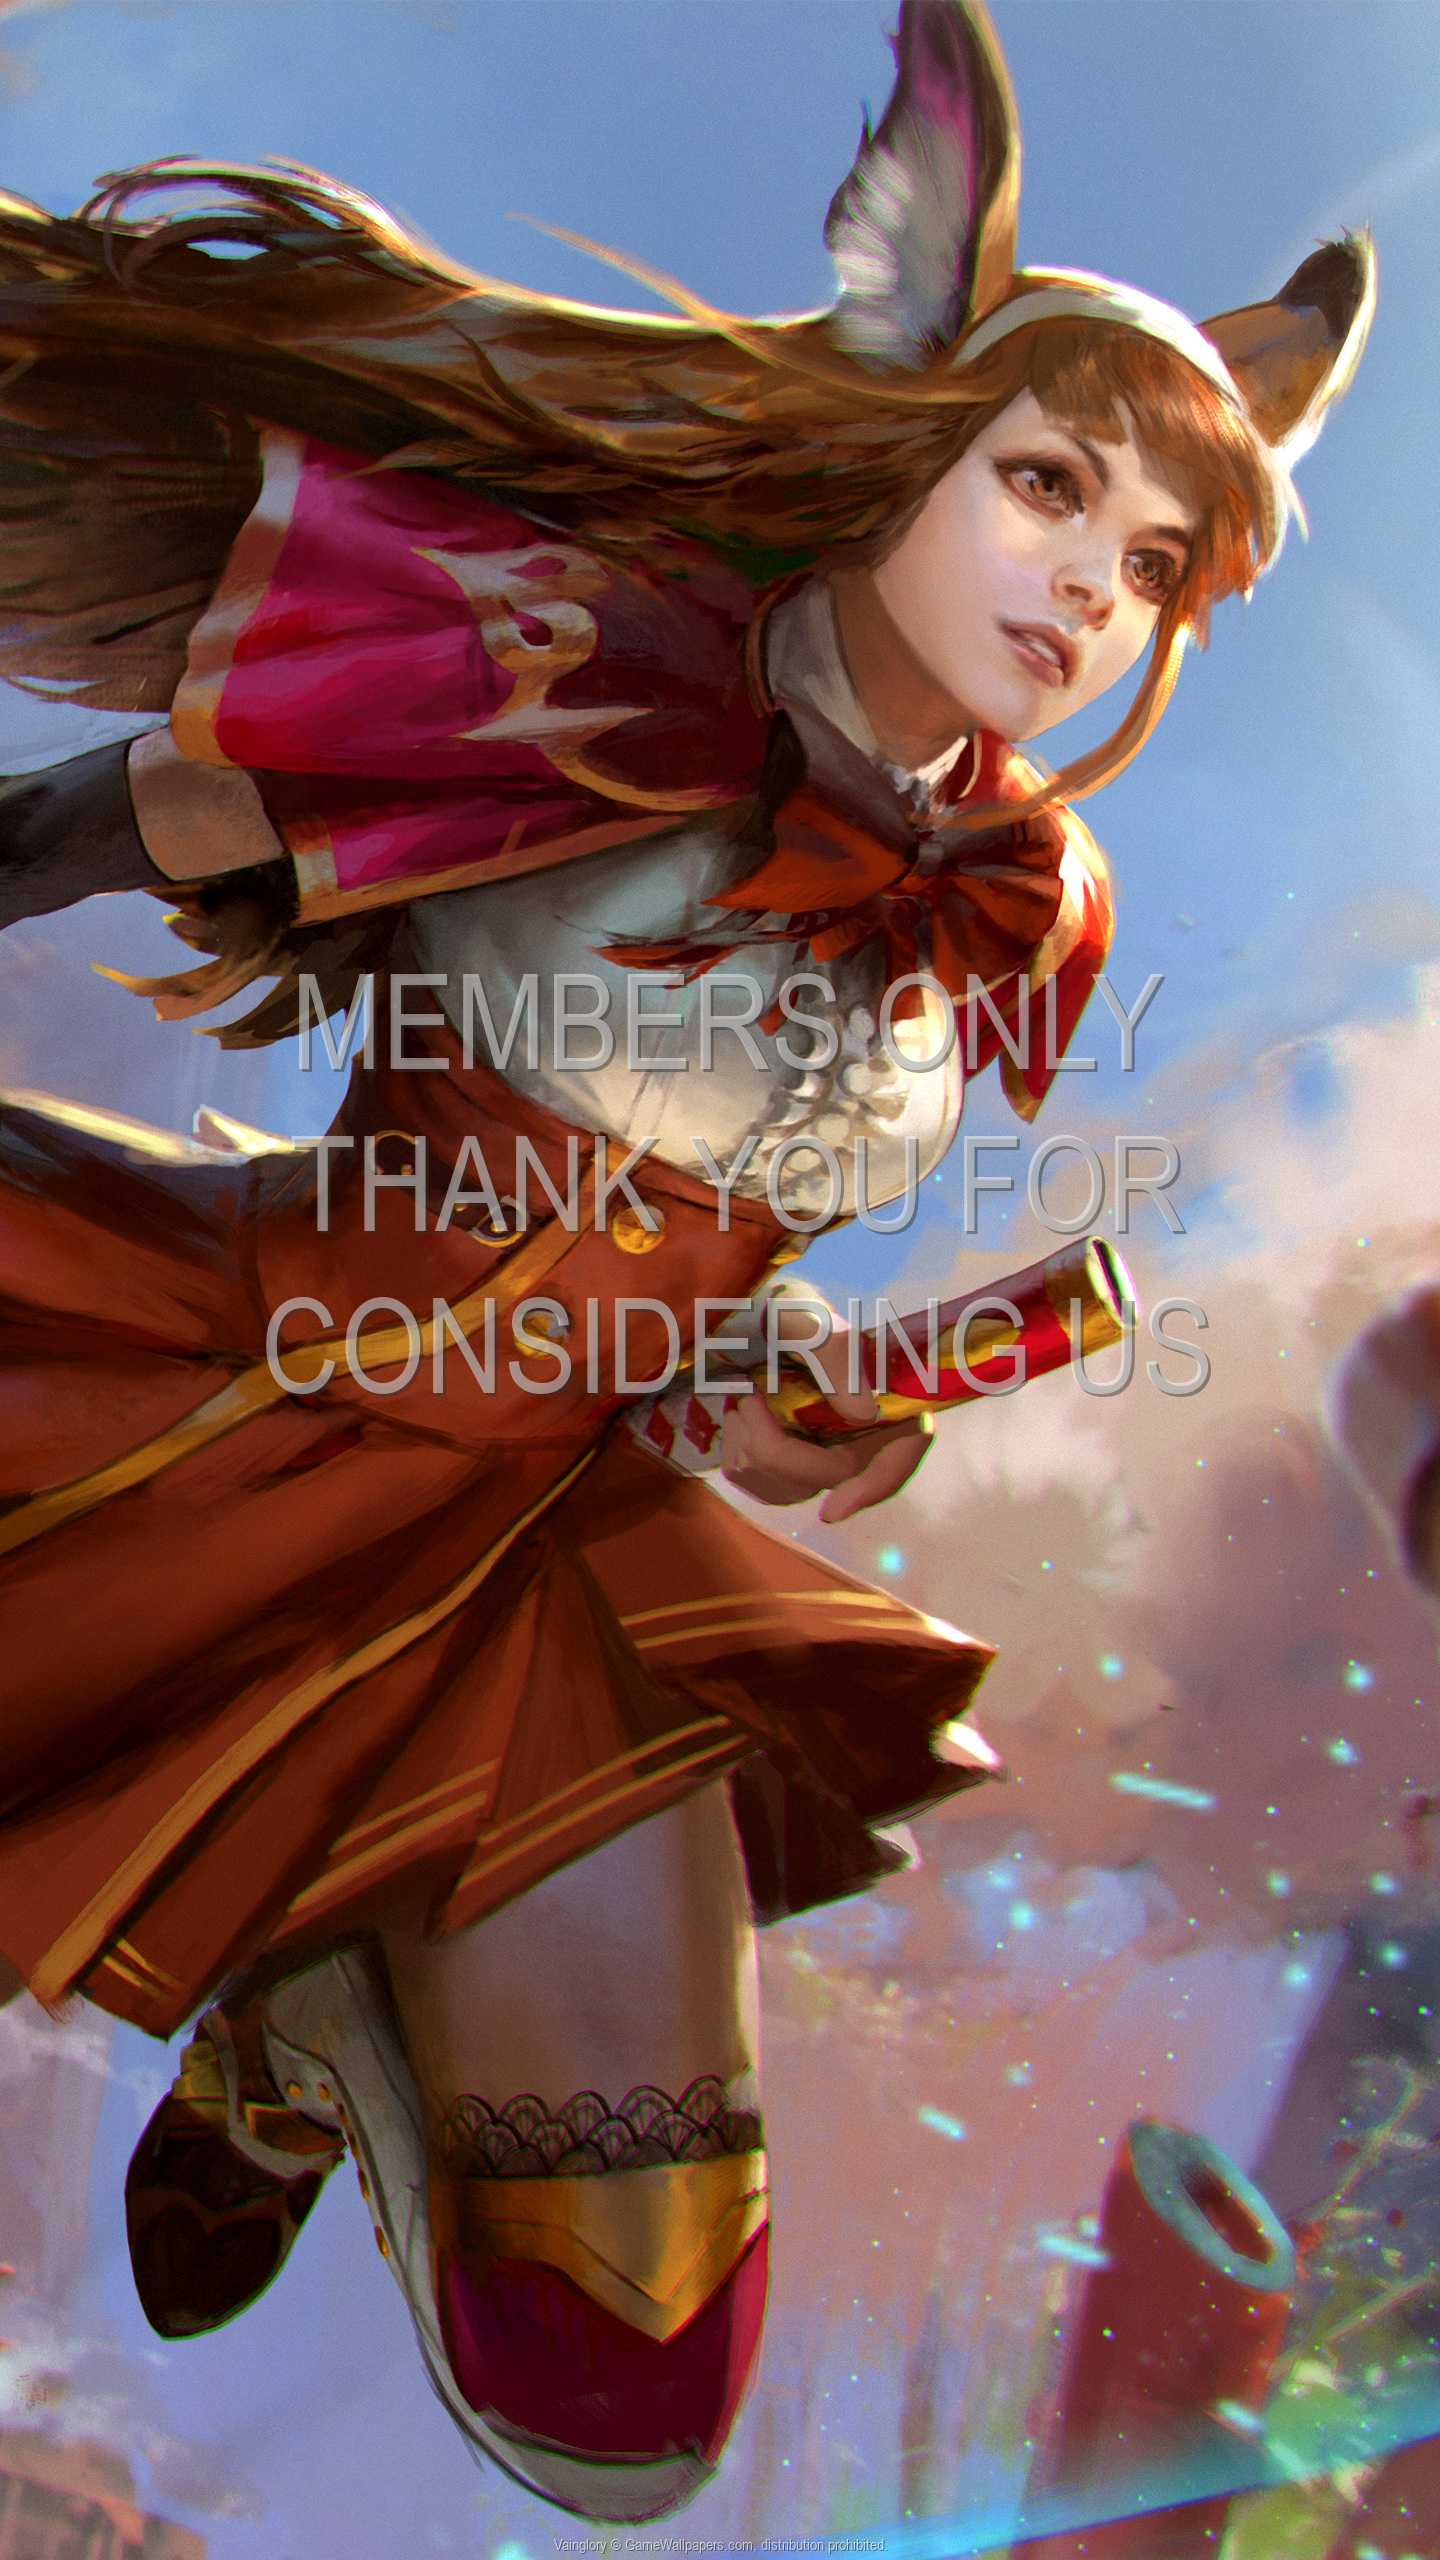 Vainglory 1440p%20Vertical Mobile wallpaper or background 04